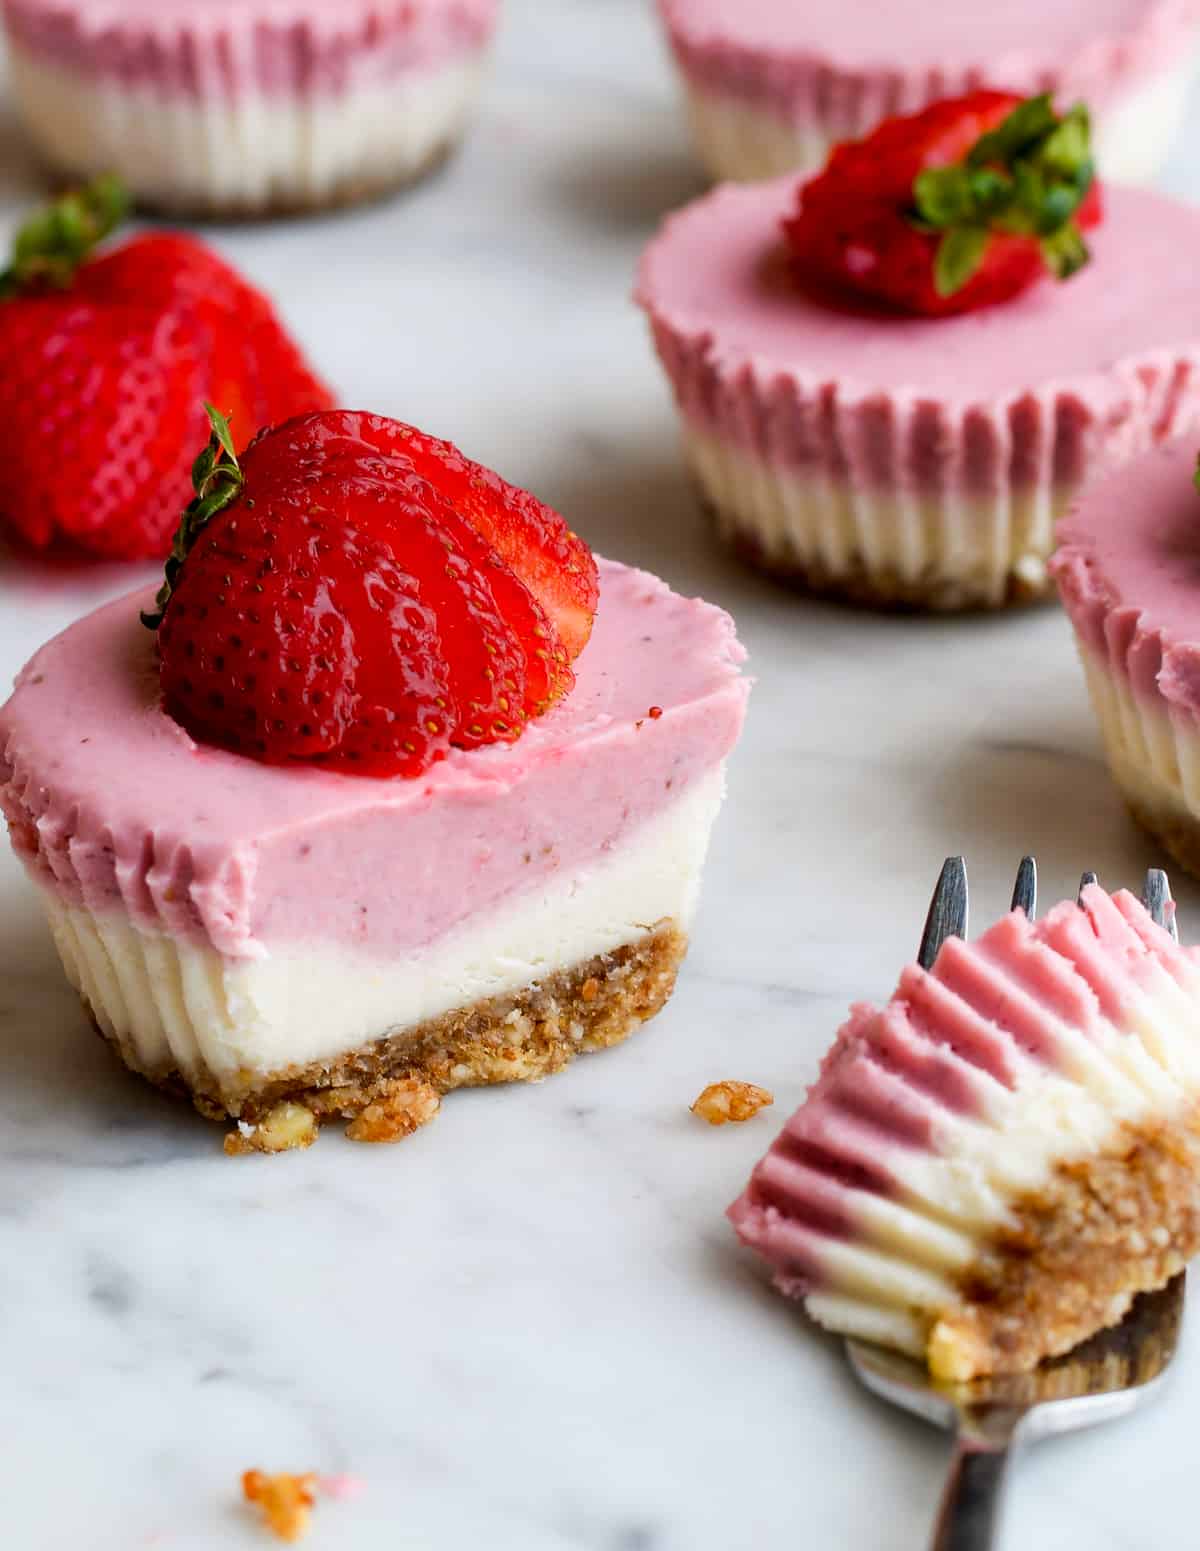 Mini Strawberry Cheesecakes close up with a strawberry fan garnish